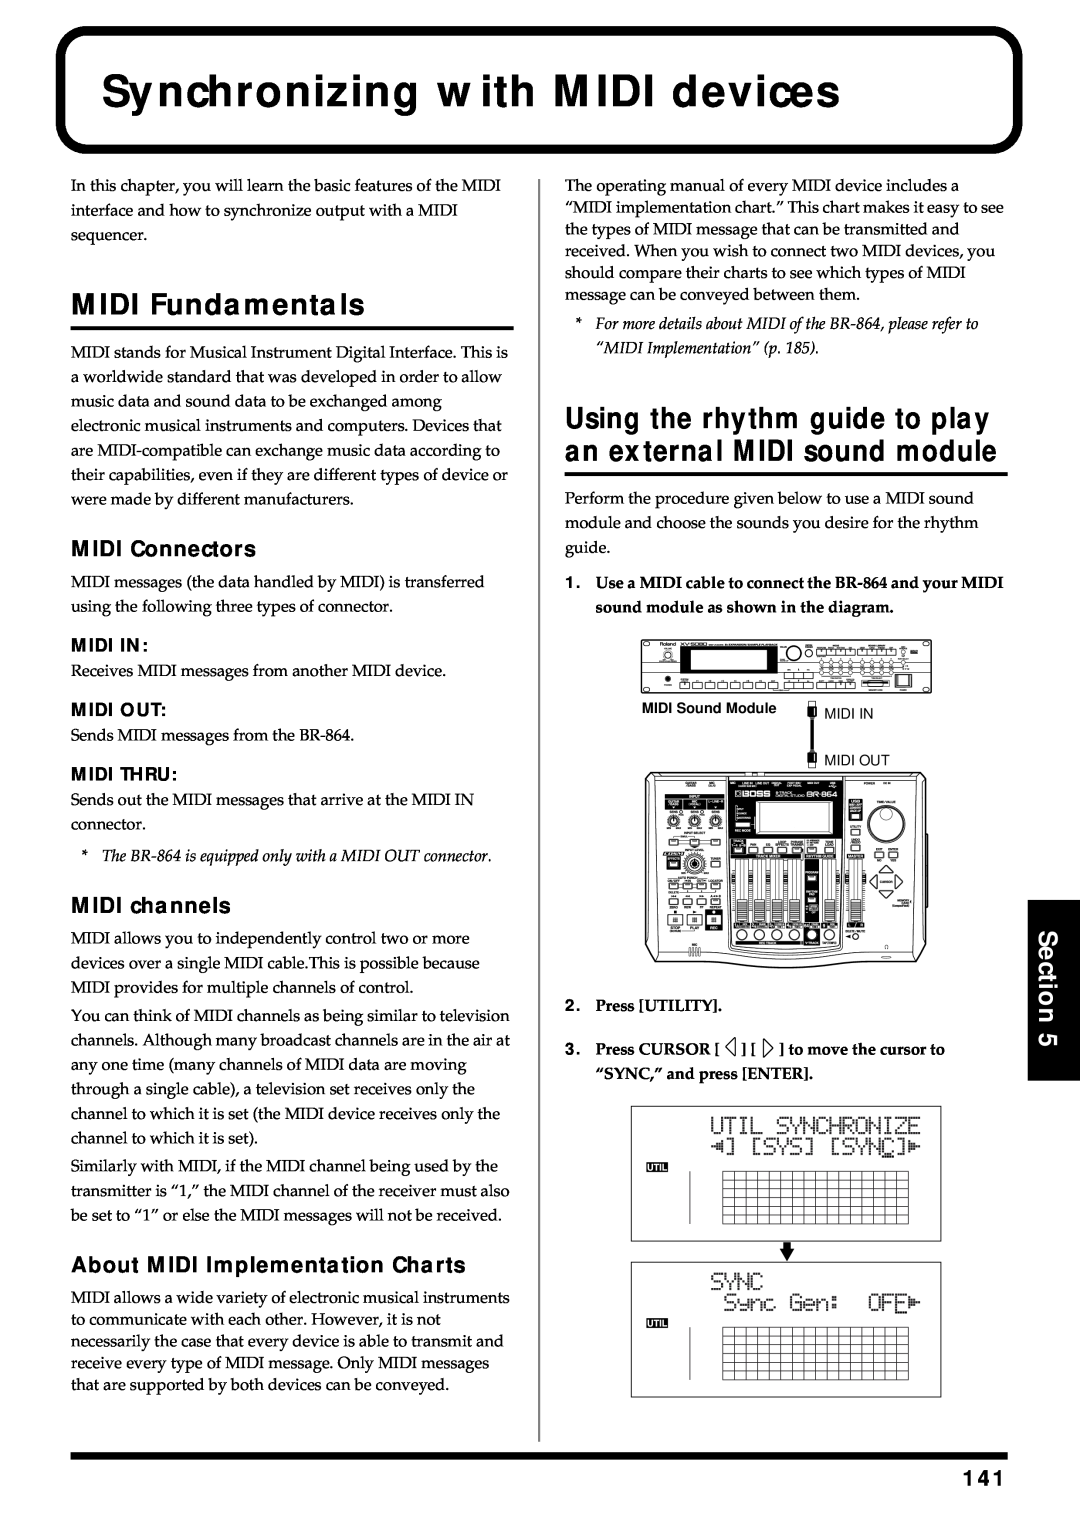 Roland BR-864 owner manual Synchronizing with MIDI devices, MIDI Fundamentals, Section 